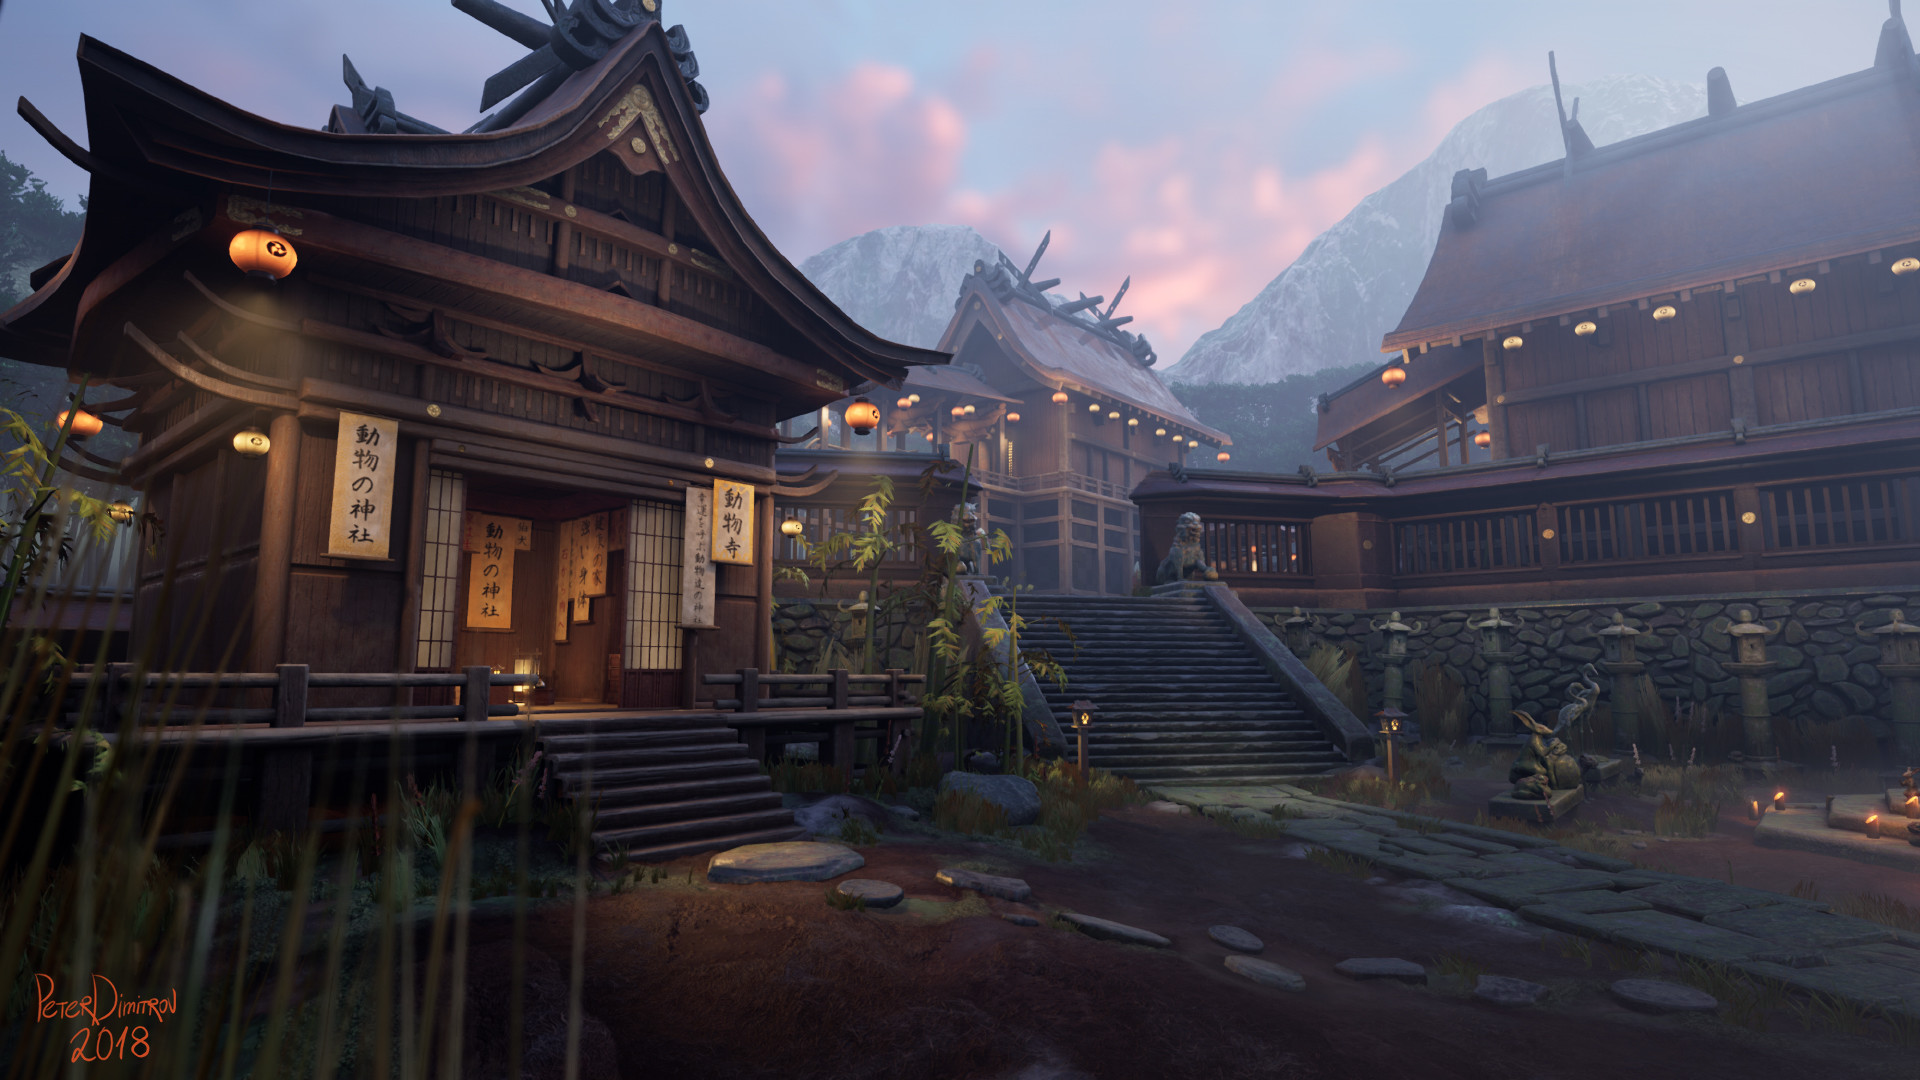 Another screenshot from the UE4 scene. Shows an angled, close to the ground view of the calligraphers hut. To the left are some grasses and foliage obscuring the camera and blurred.